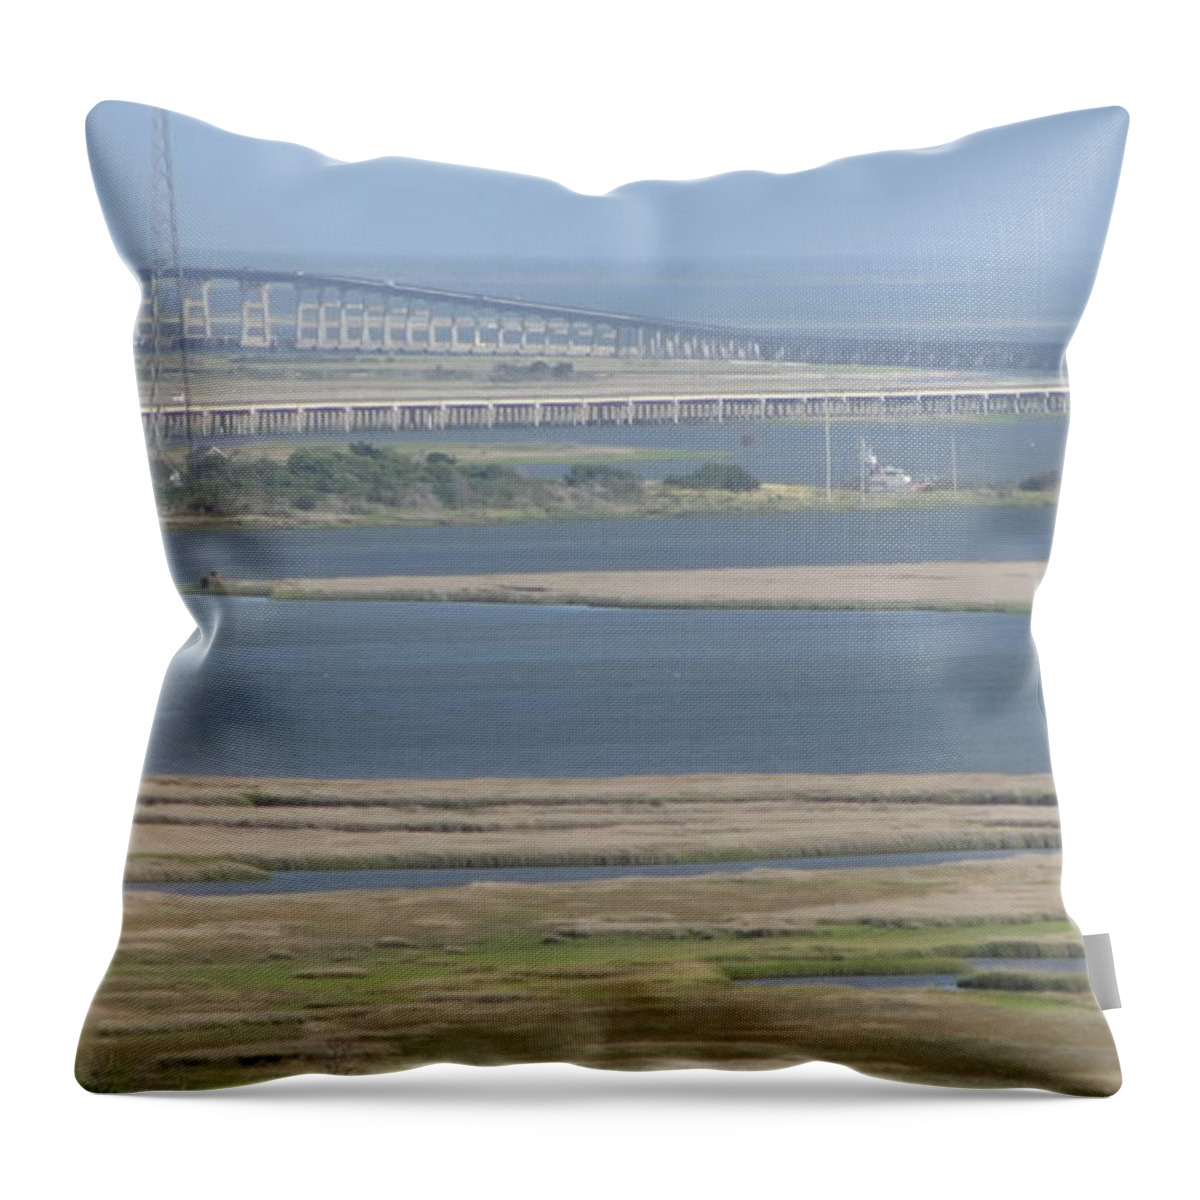 Lighthouse Throw Pillow featuring the photograph Oregon Inlet Bridge by Cathy Lindsey